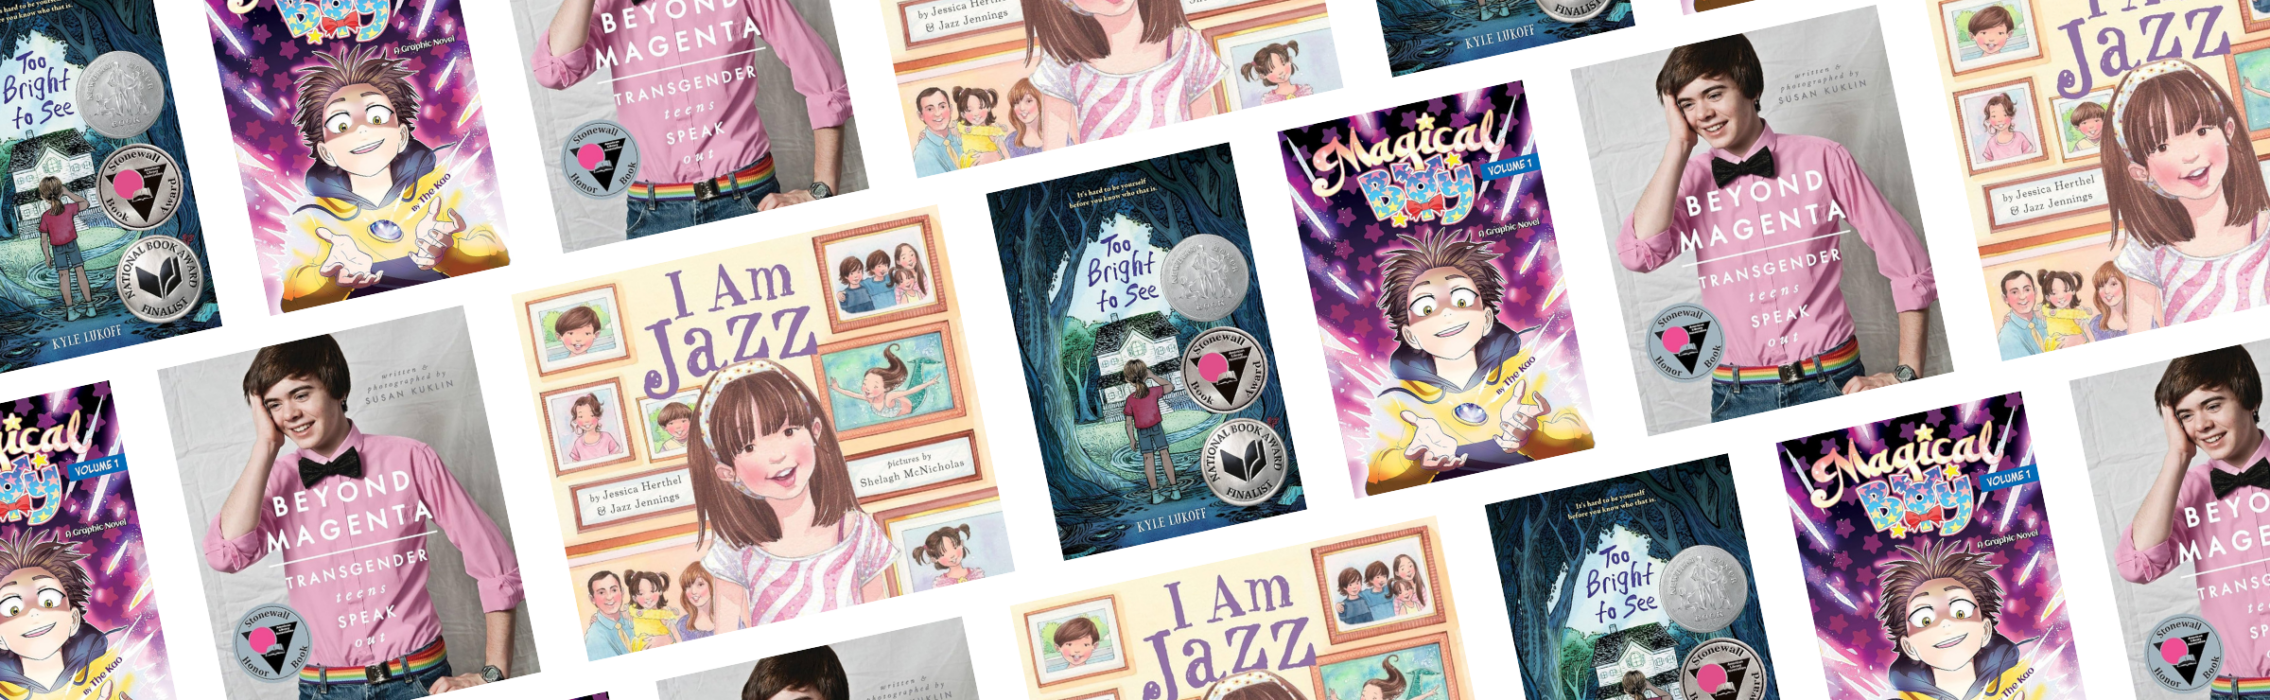 A collage of book covers relating to transgender themes including Too Bright to See by Kyle Lukoff; Magical Boy by The Kao; Beyond Magenta by Susan Kuklin; and I Am Jazz by Jazz Jennings